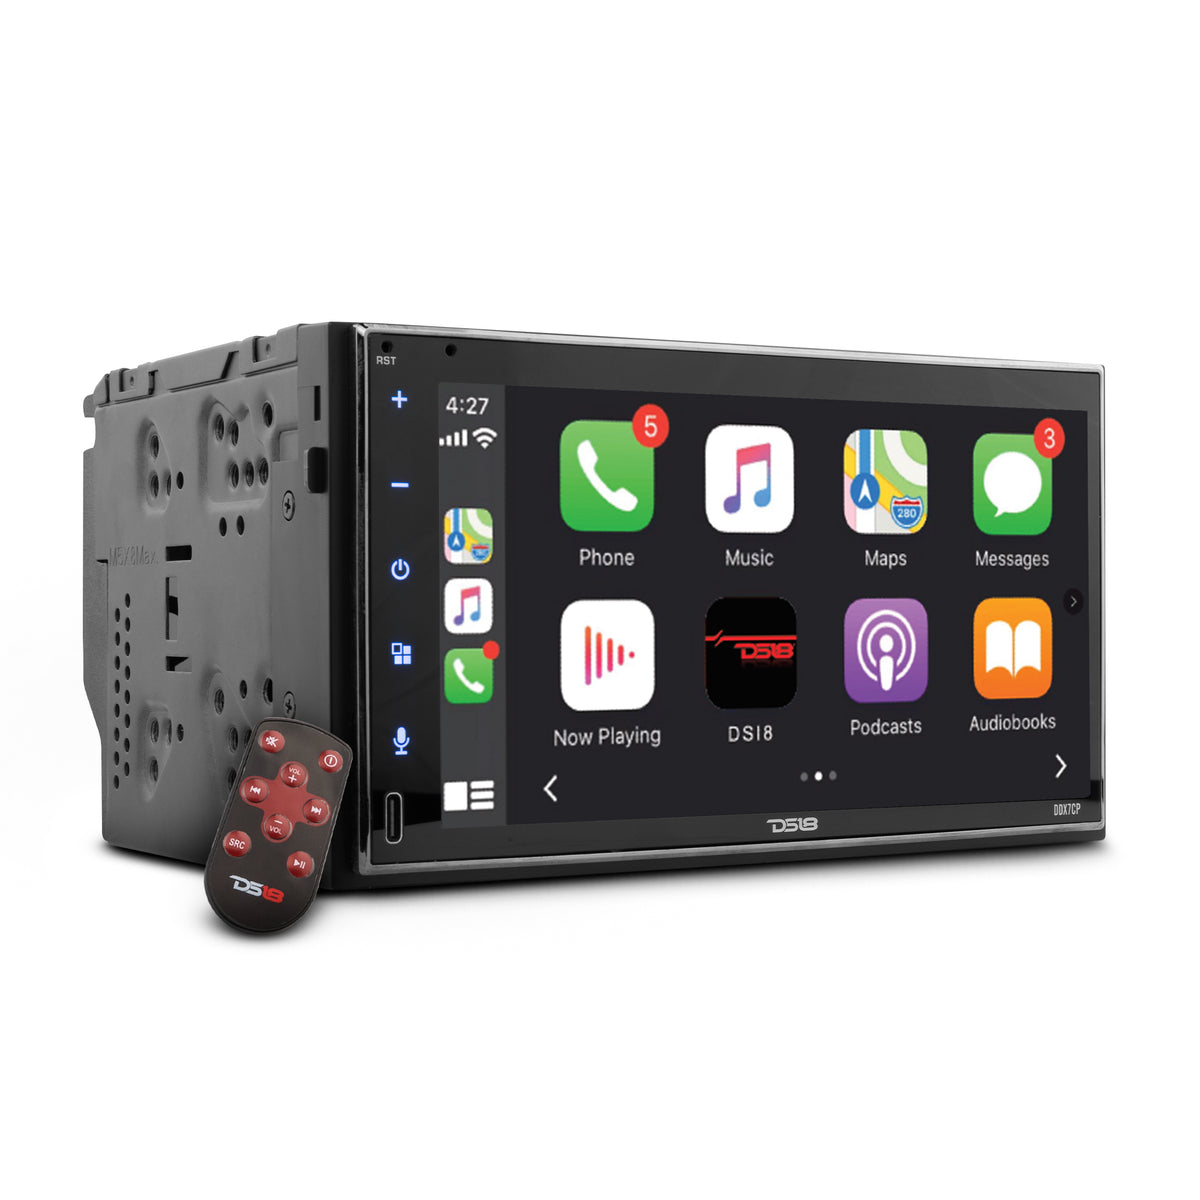 7" Touchscreen Mechless Double-DIN Headunit with Bluetooth, USB, Mirror Link And Car play